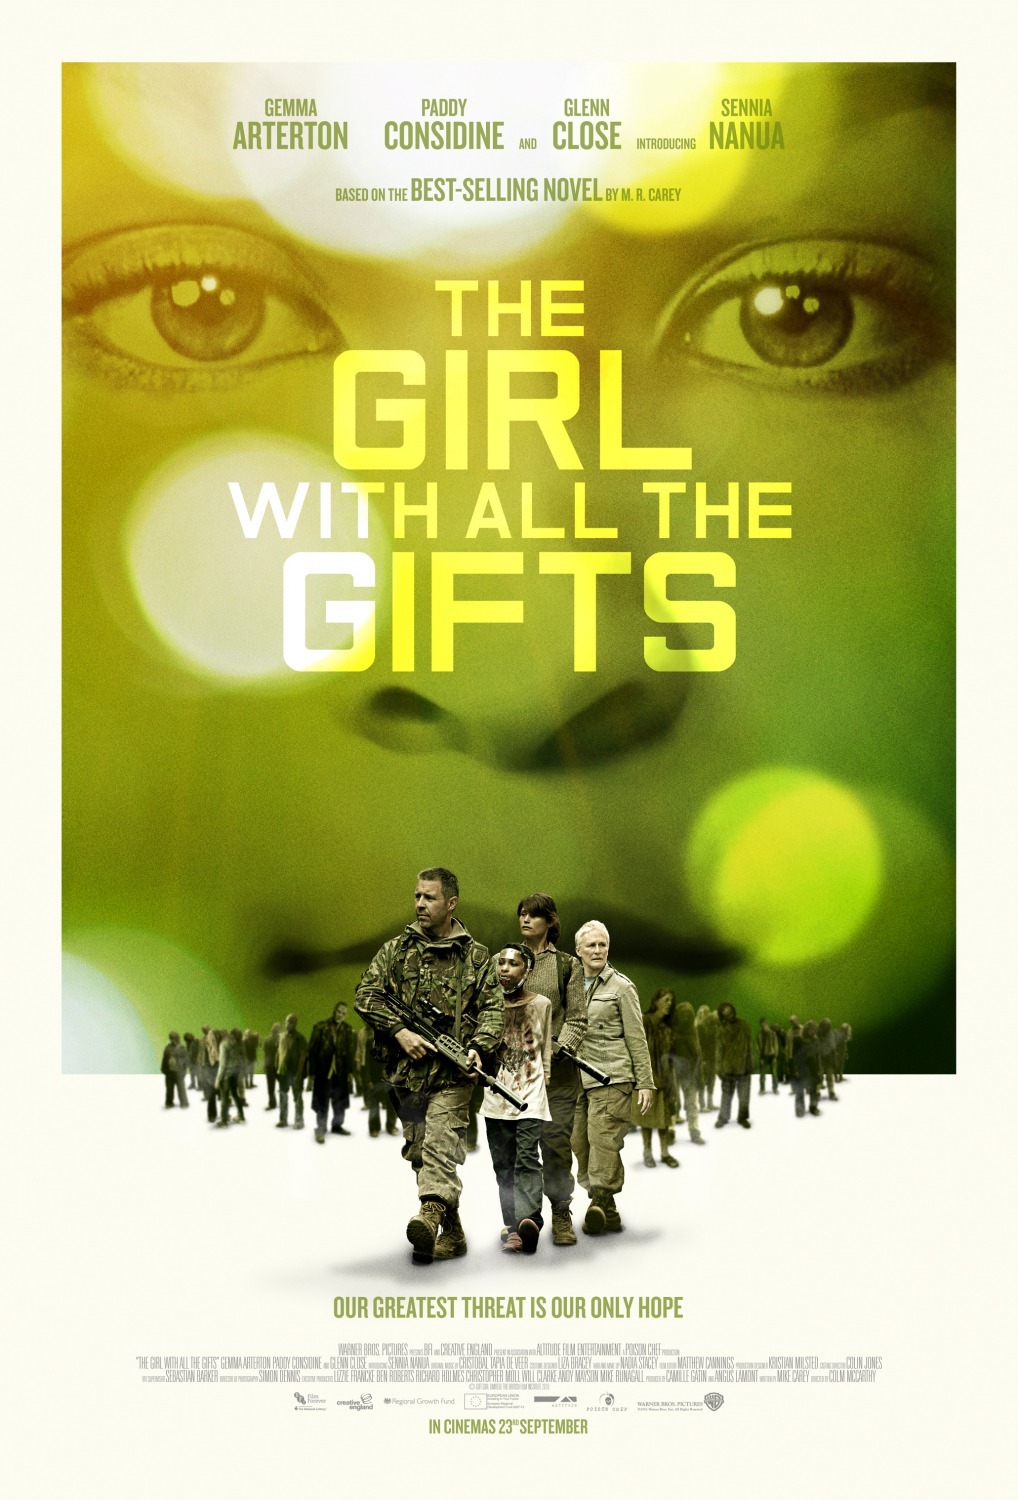 Nonton film The Girl With All The Gifts layarkaca21 indoxx1 ganool online streaming terbaru